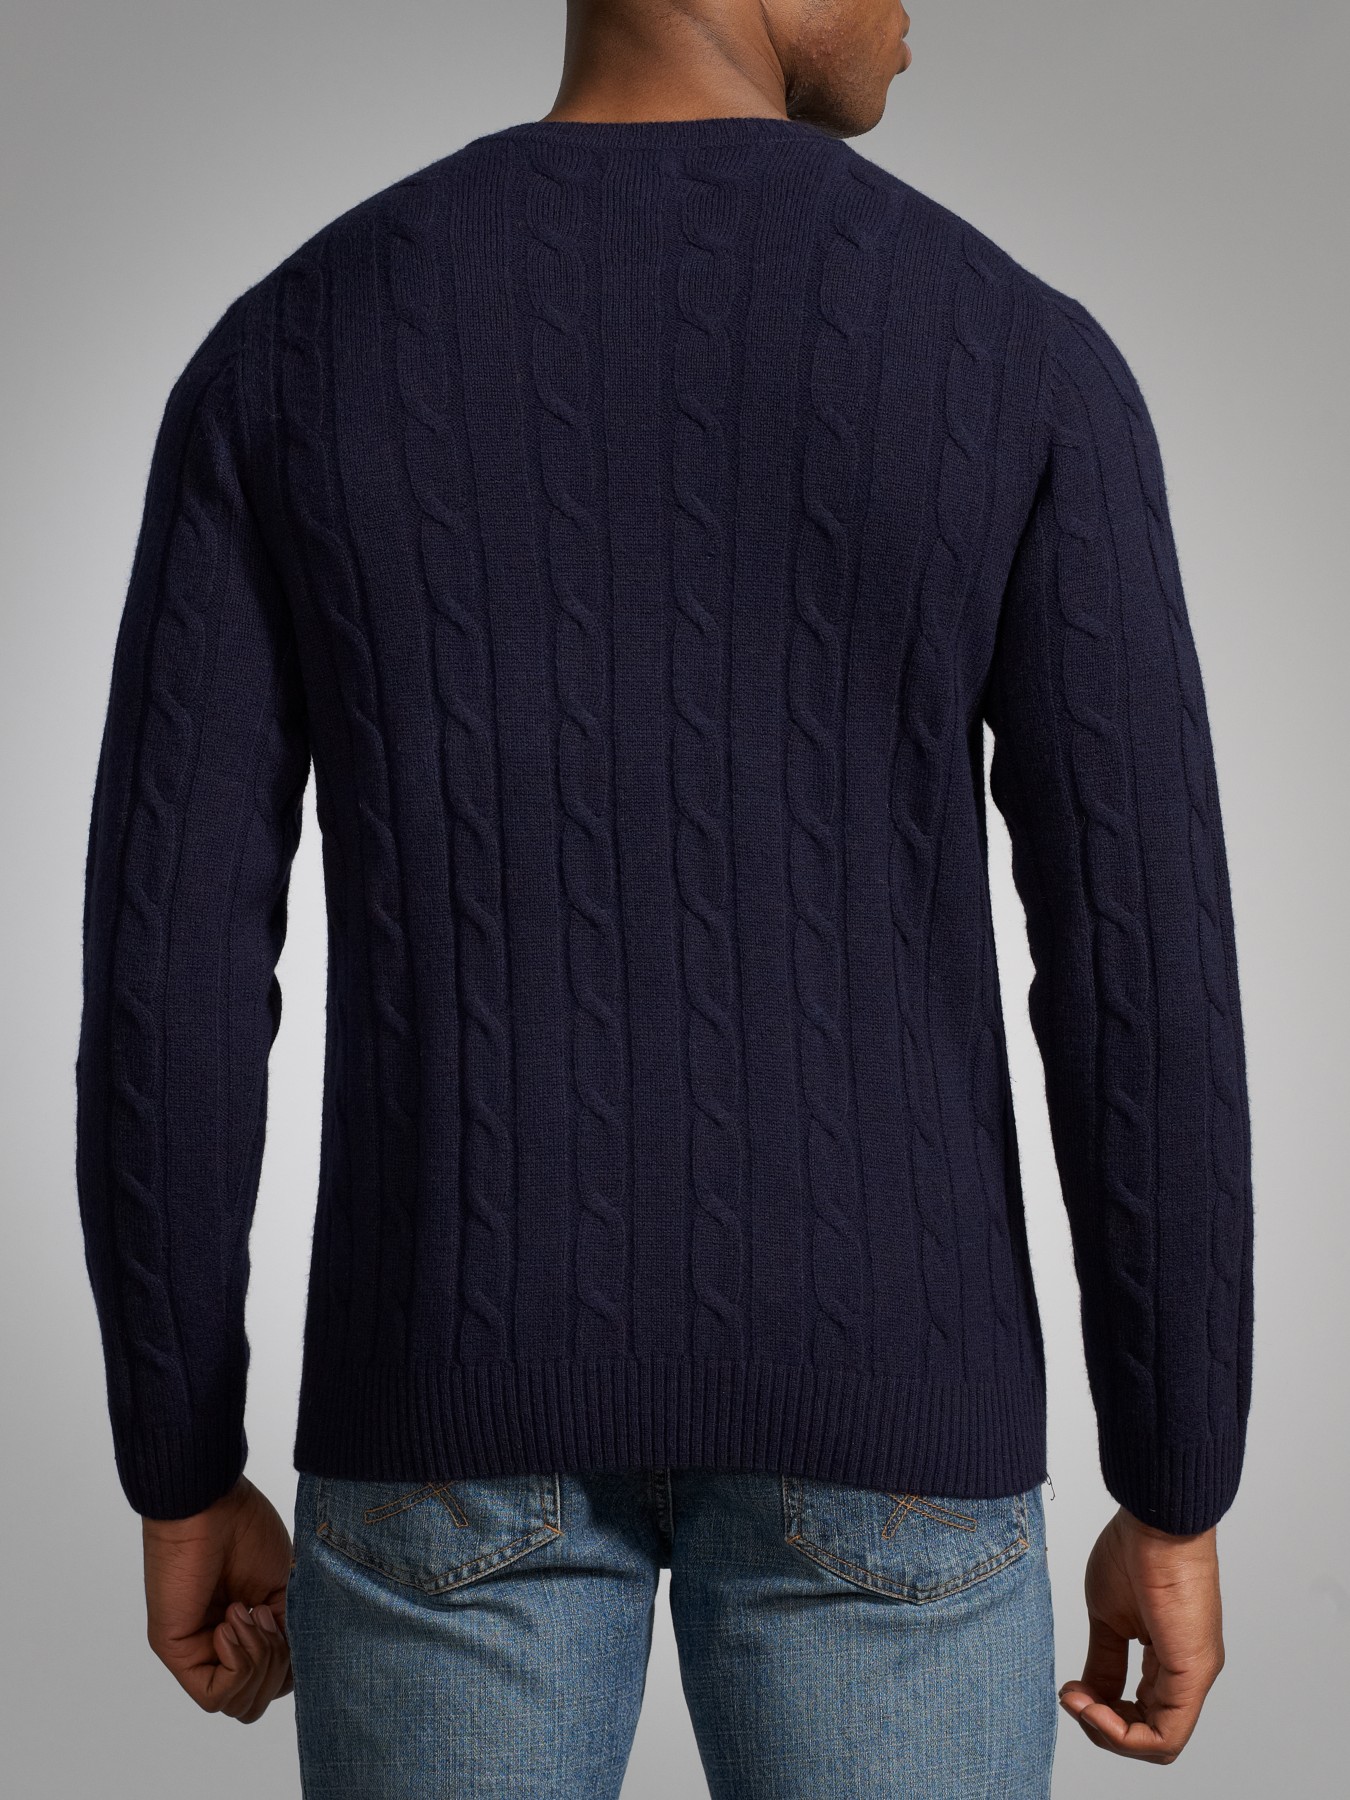 GANT Lambs Wool Cable Crew Neck Jumper in Navy (Blue) for Men - Lyst